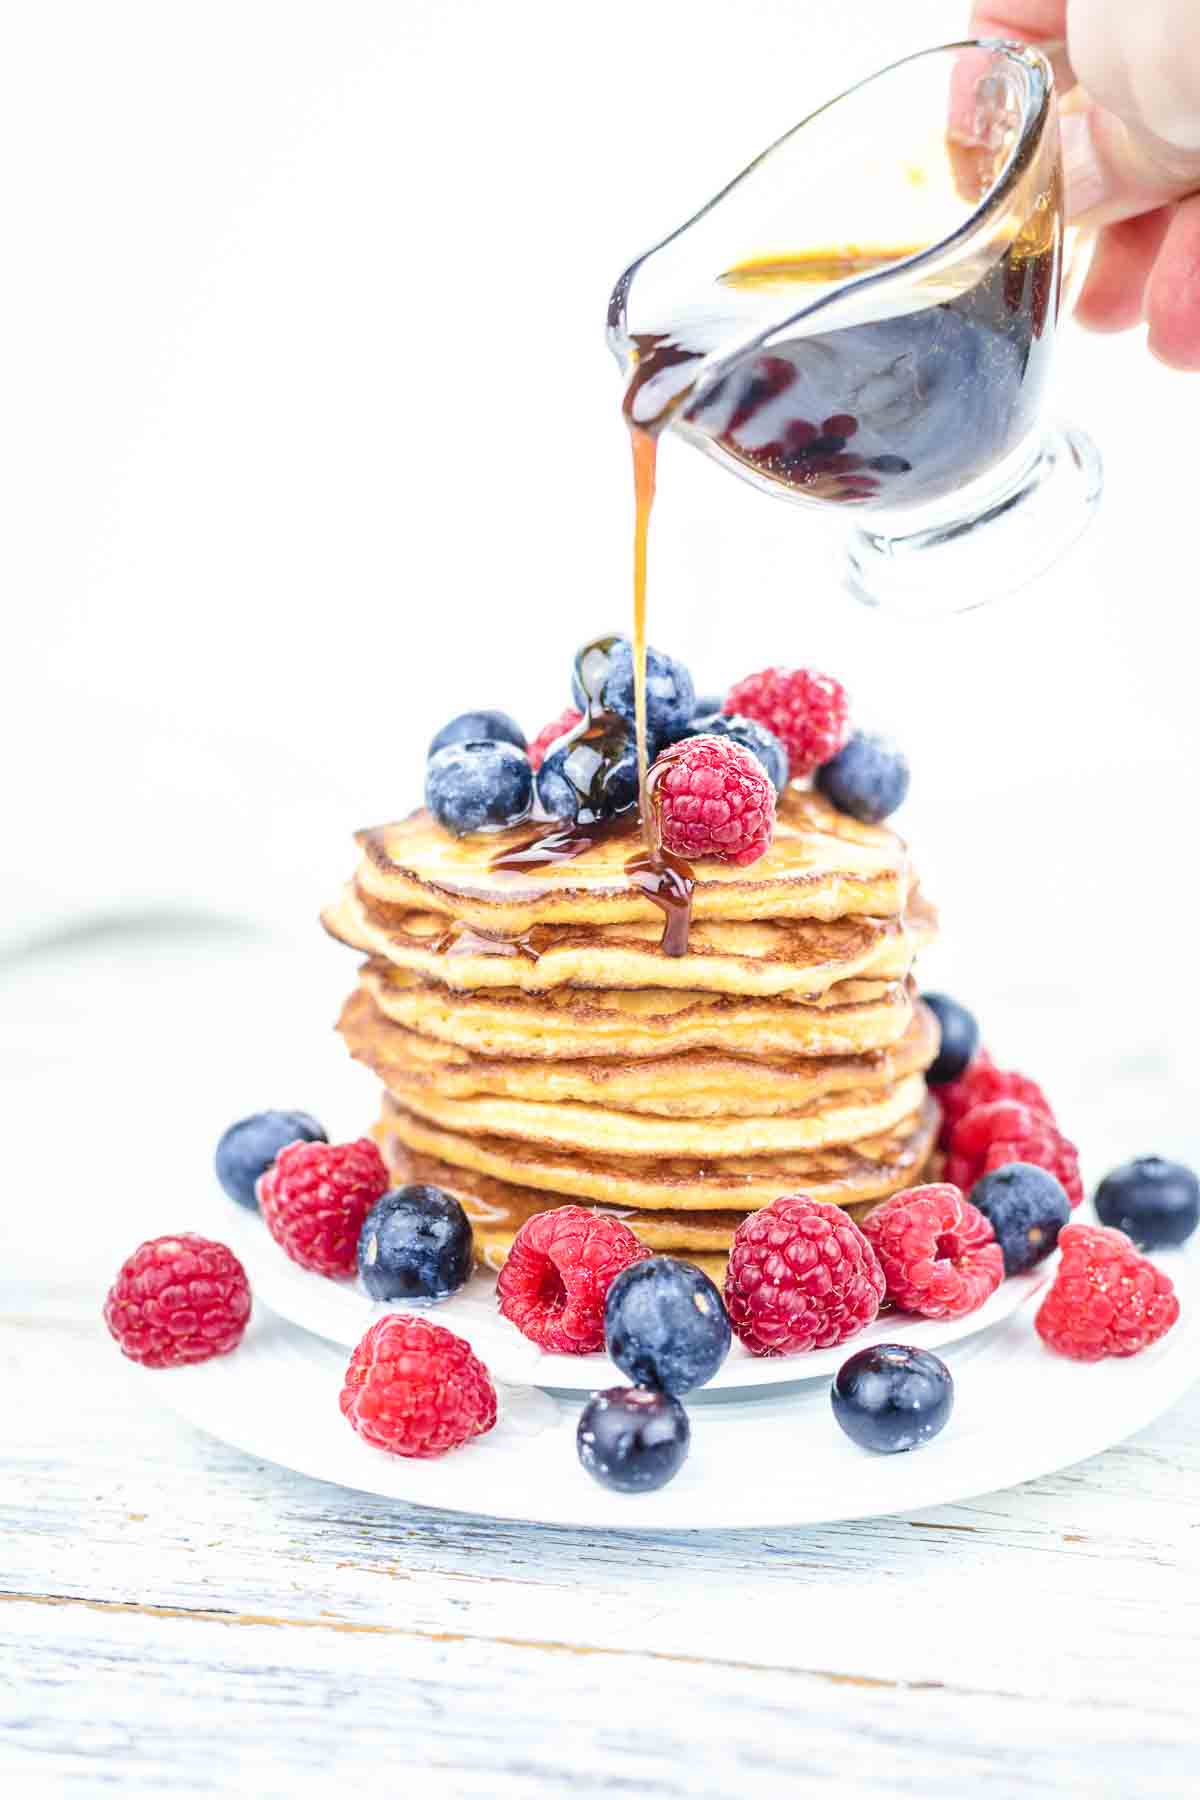 How to Make Sugar Free Maple Syrup for pancakes